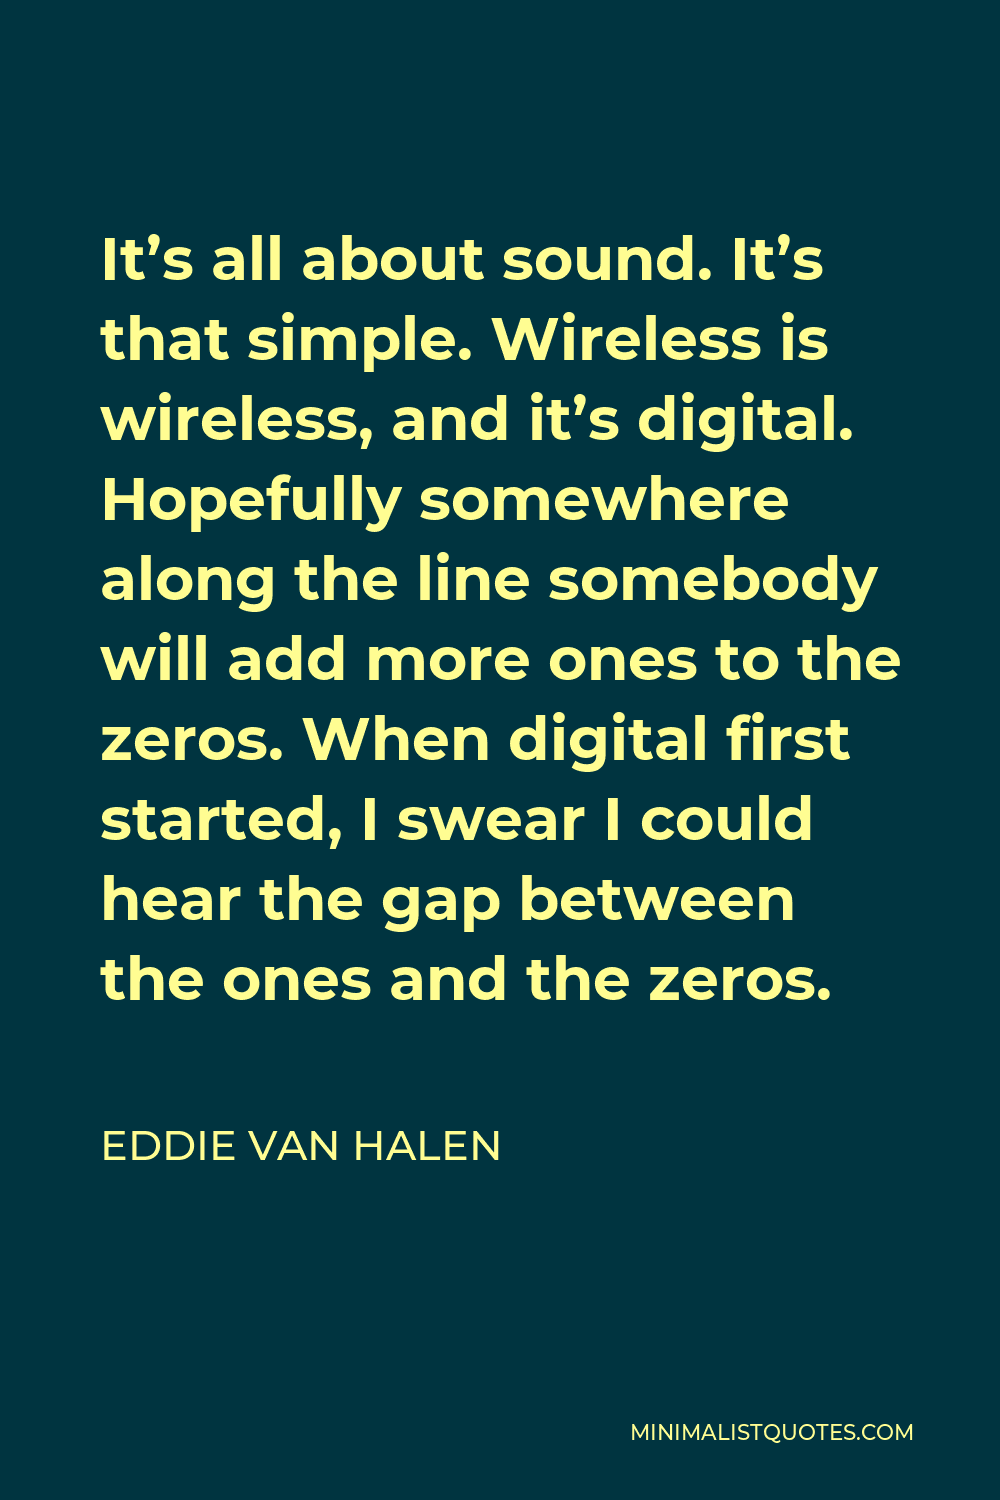 Eddie Van Halen Quote - It’s all about sound. It’s that simple. Wireless is wireless, and it’s digital. Hopefully somewhere along the line somebody will add more ones to the zeros. When digital first started, I swear I could hear the gap between the ones and the zeros.